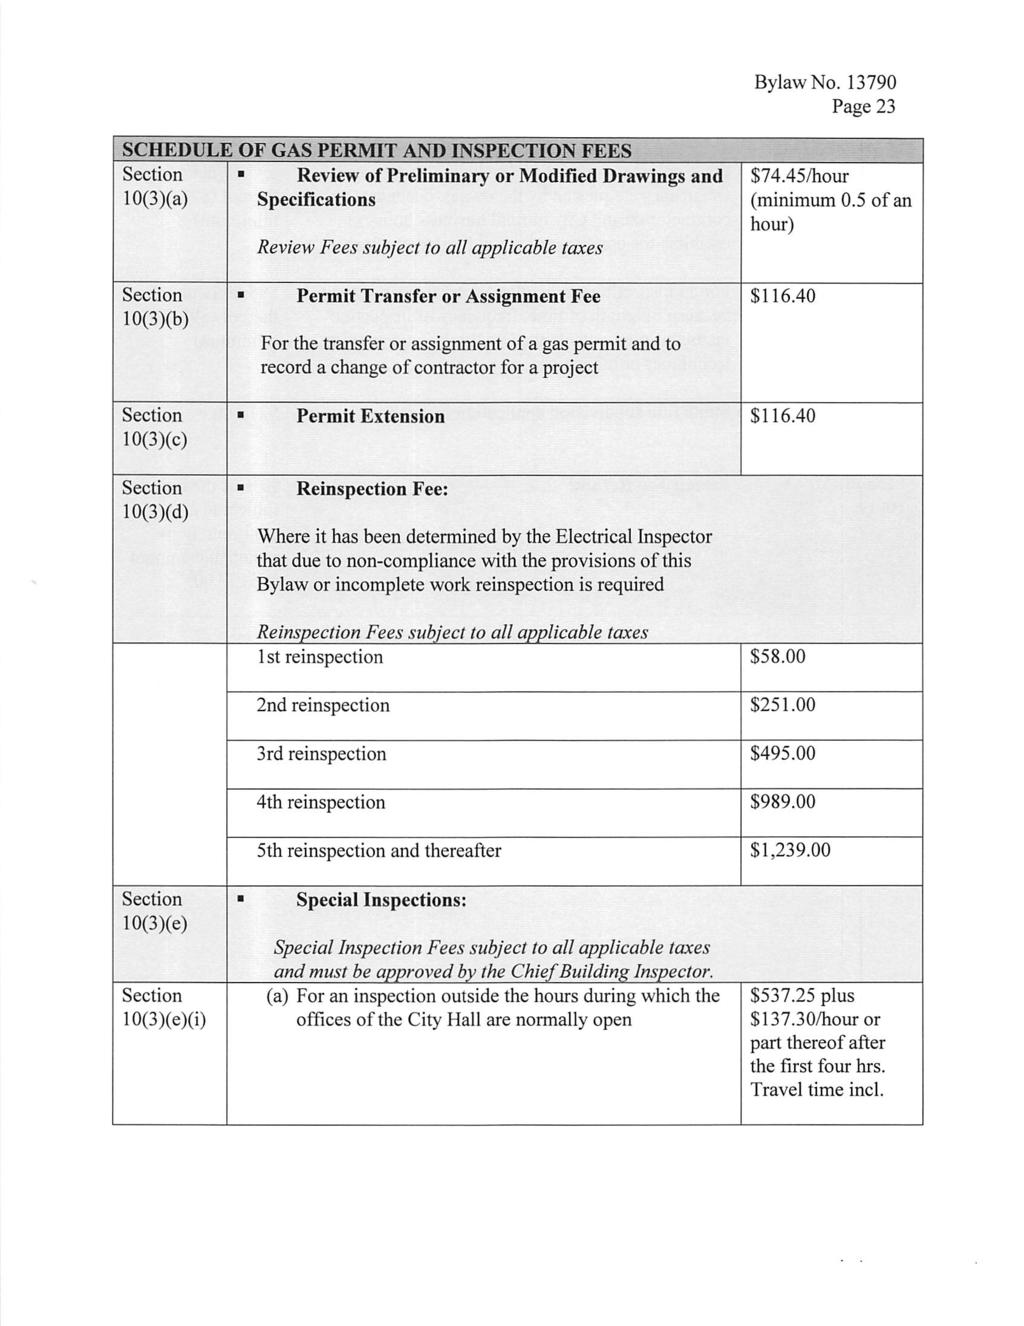 Page 23 SCHEDULE OF GAS PERMIT AND INSPECTION FEES 10(3)(a) Review of Preliminary or Modified Drawings and Specifications Review Fees subject to all applicable taxes PermitTransfer or Assignment Fee